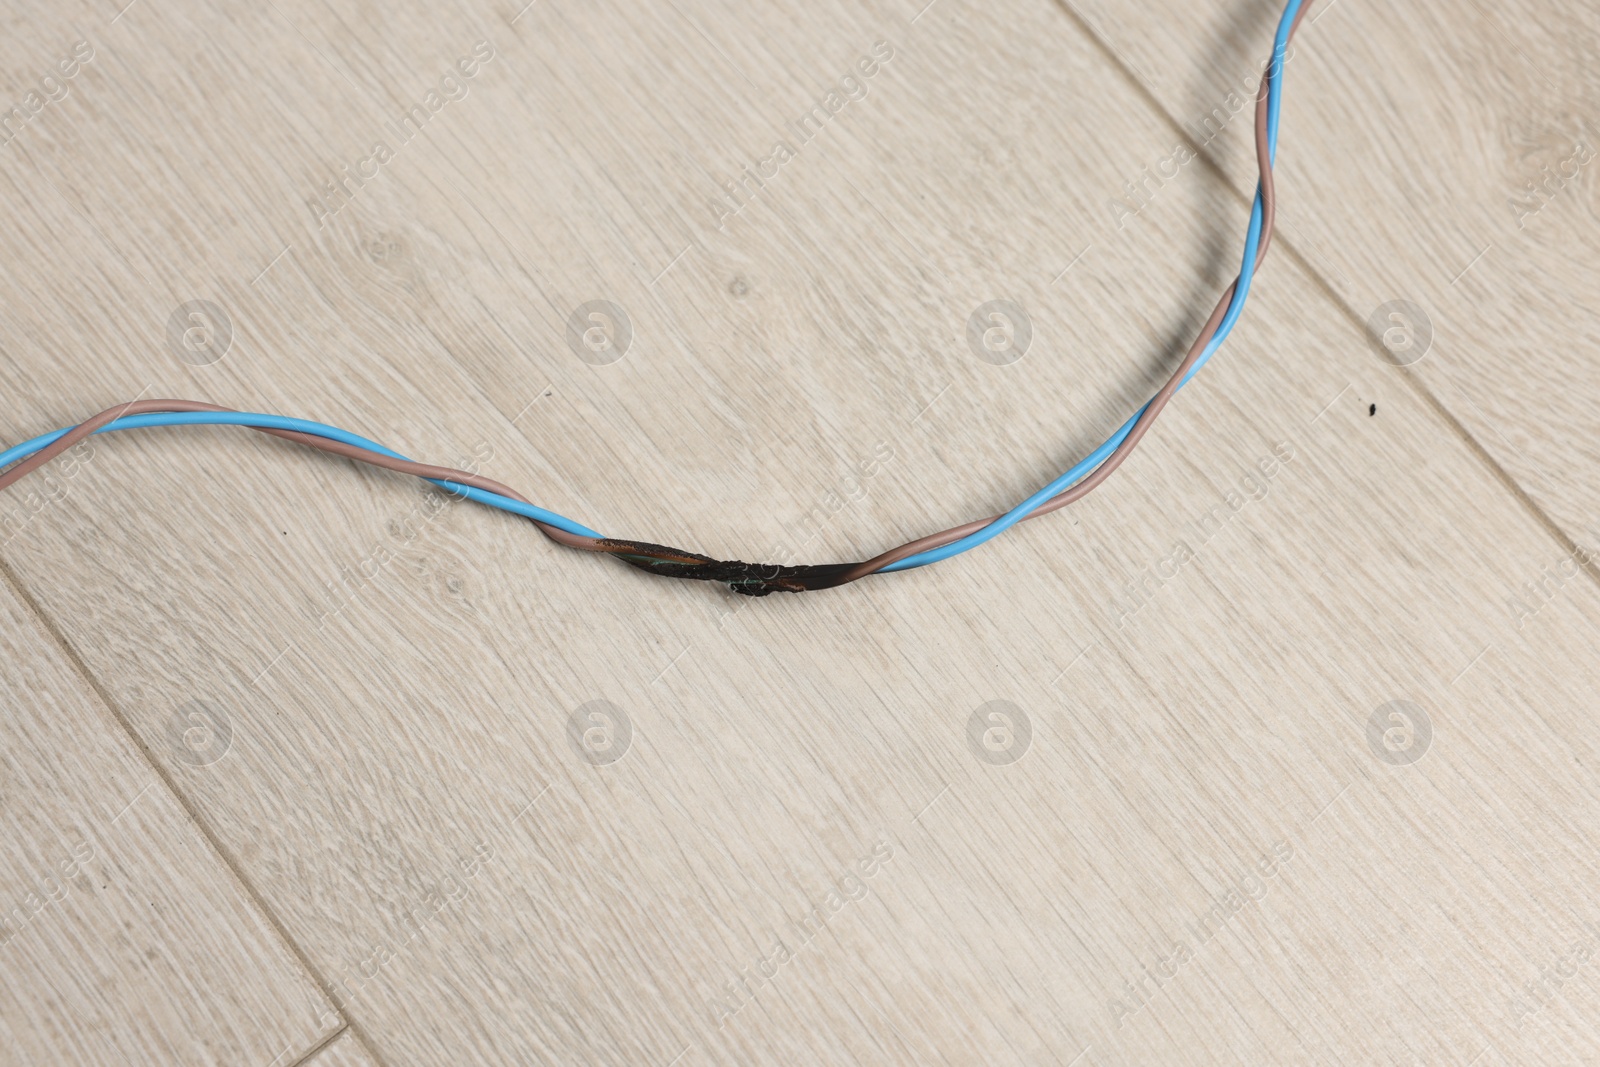 Photo of Burnt wires on wooden floor, above view. Electrical short circuit